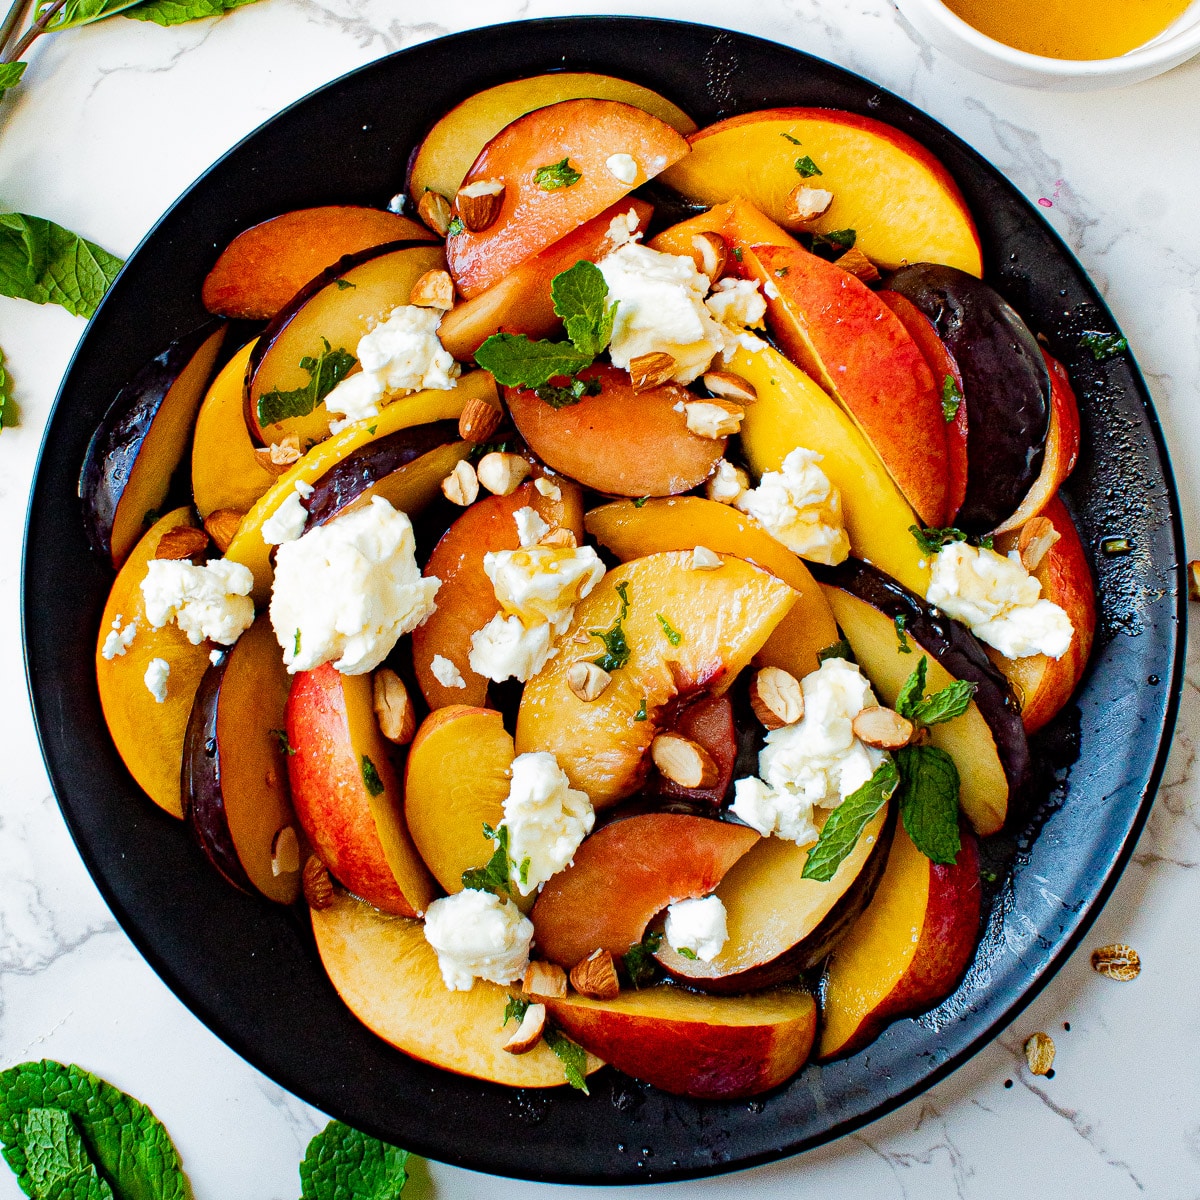 stone fruit salad on a plate